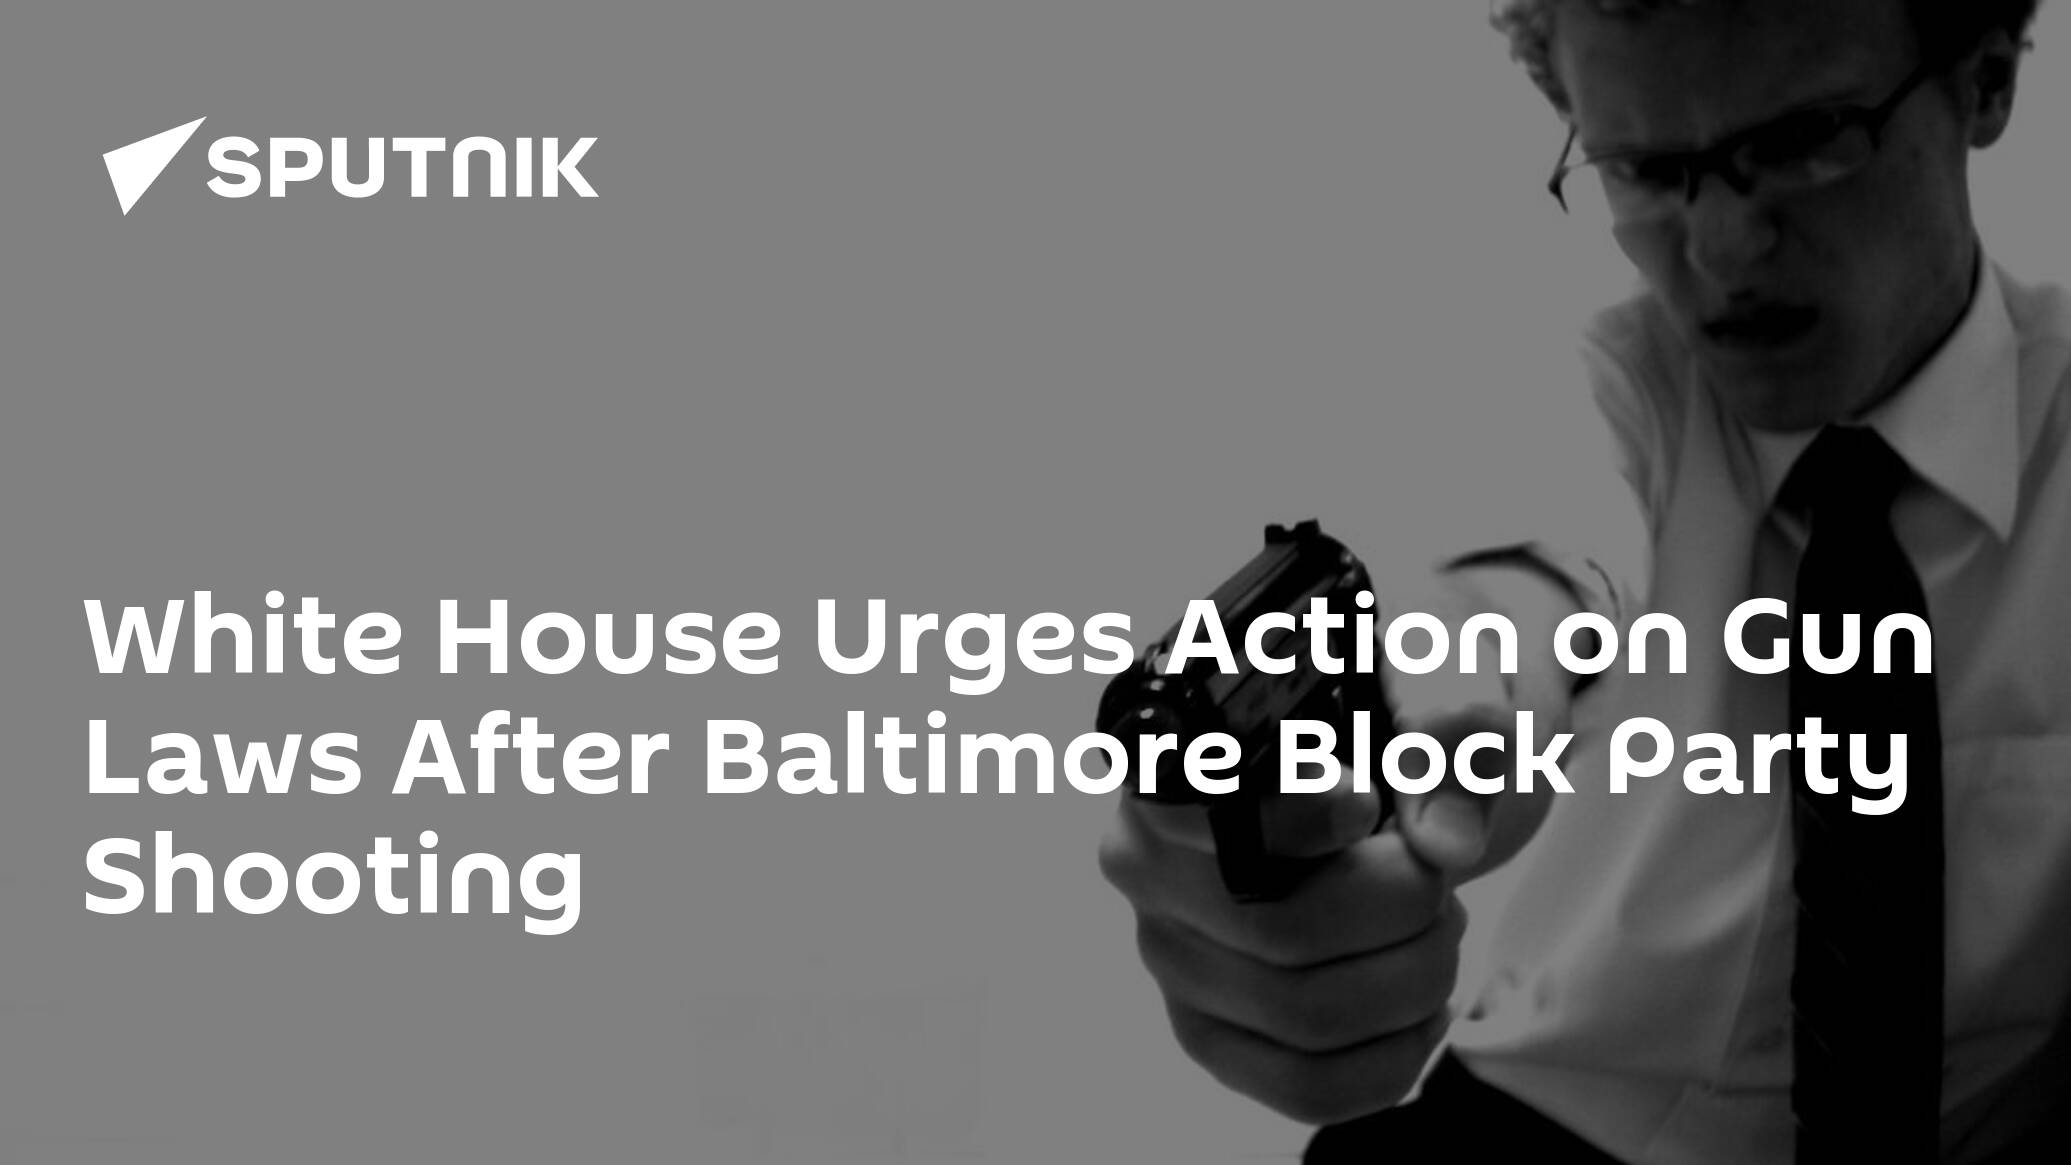 White House Urges Action on Gun Laws After Baltimore Block Party Shooting